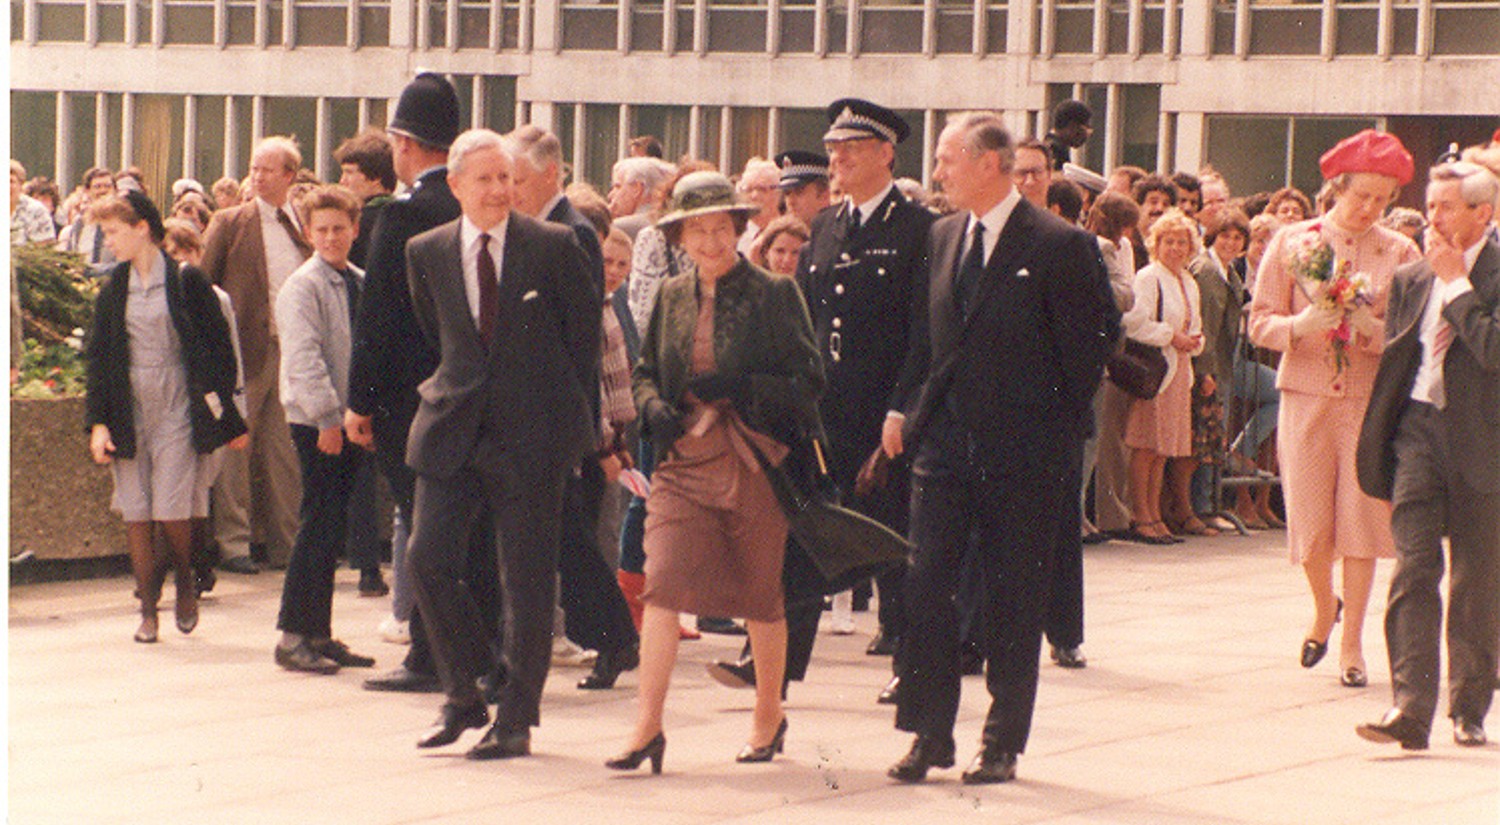 Her Majesty the Queen visits the Colchester Campus in 1985  Credit: Michael Crosby